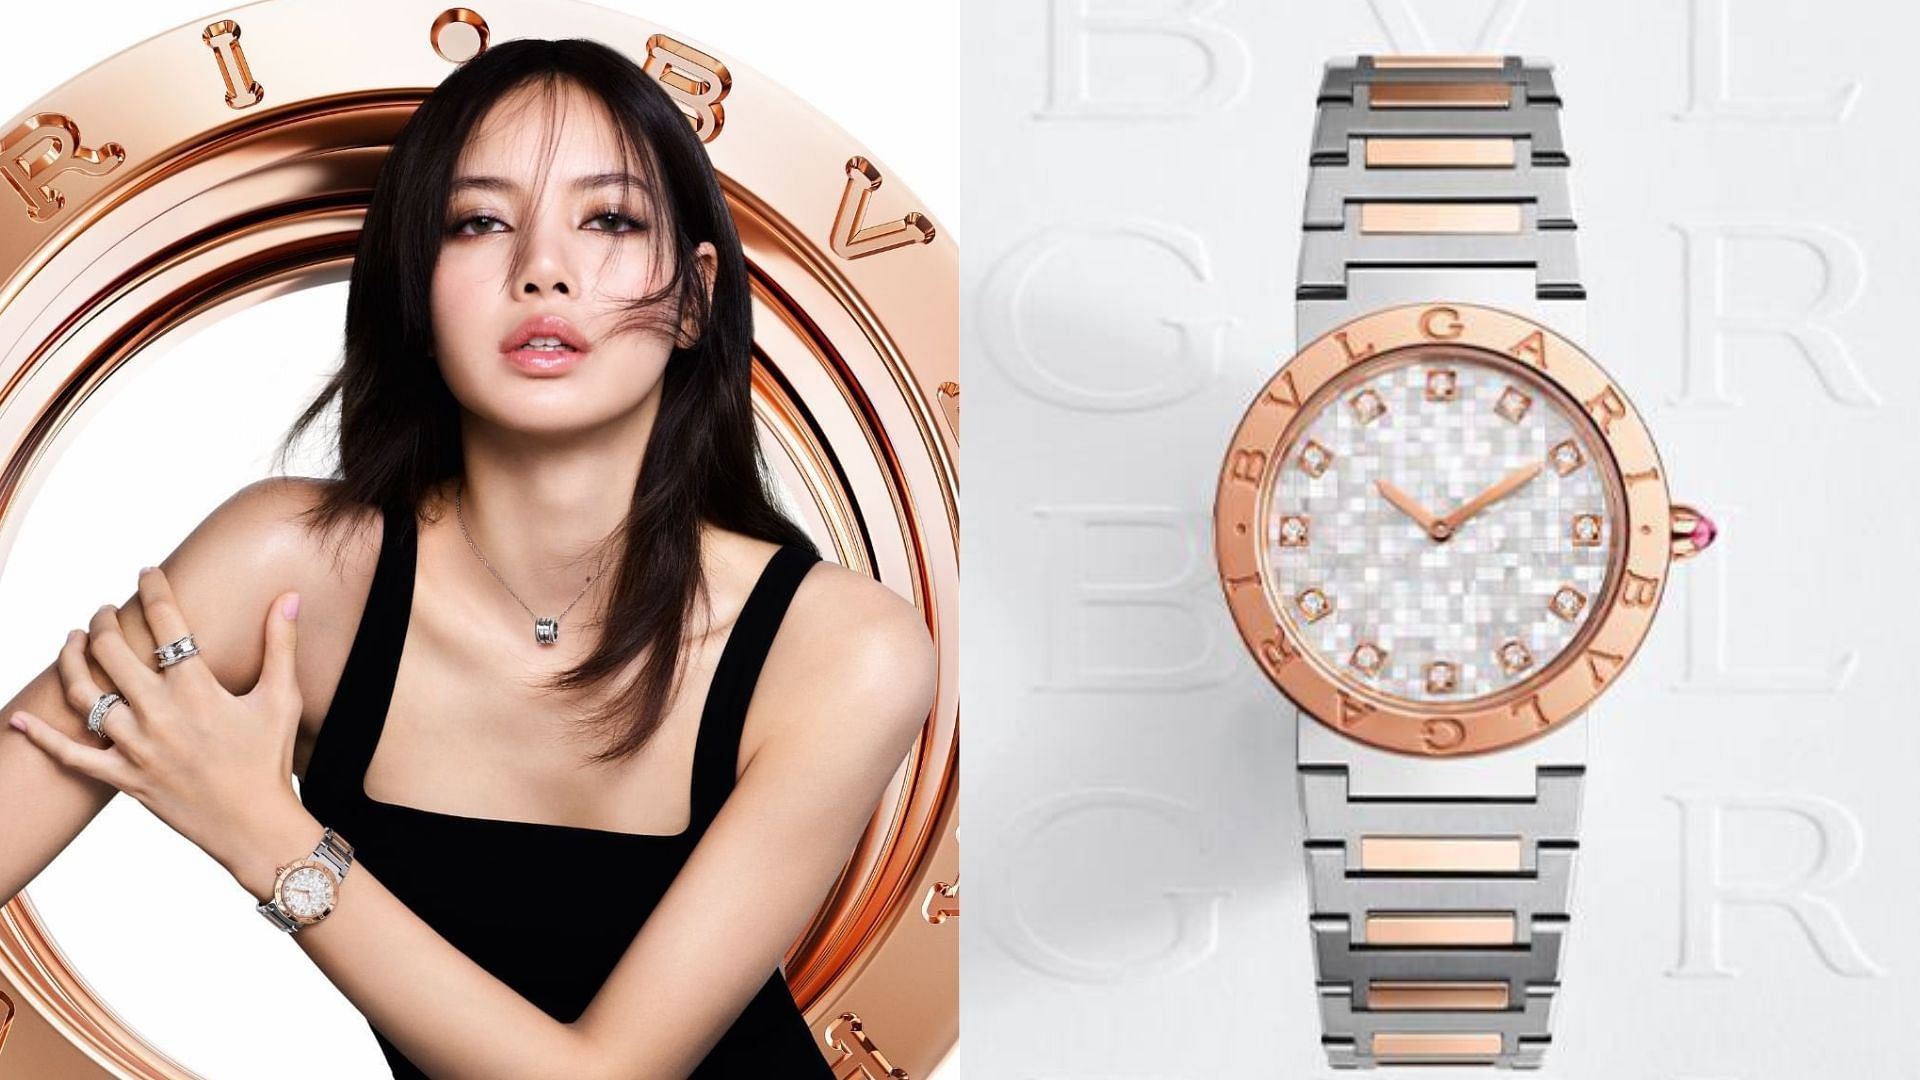 BVLGARI Launches New Limited Edition Watch Collection Collaborating With  Global Ambassador Lisa - KBIZoom